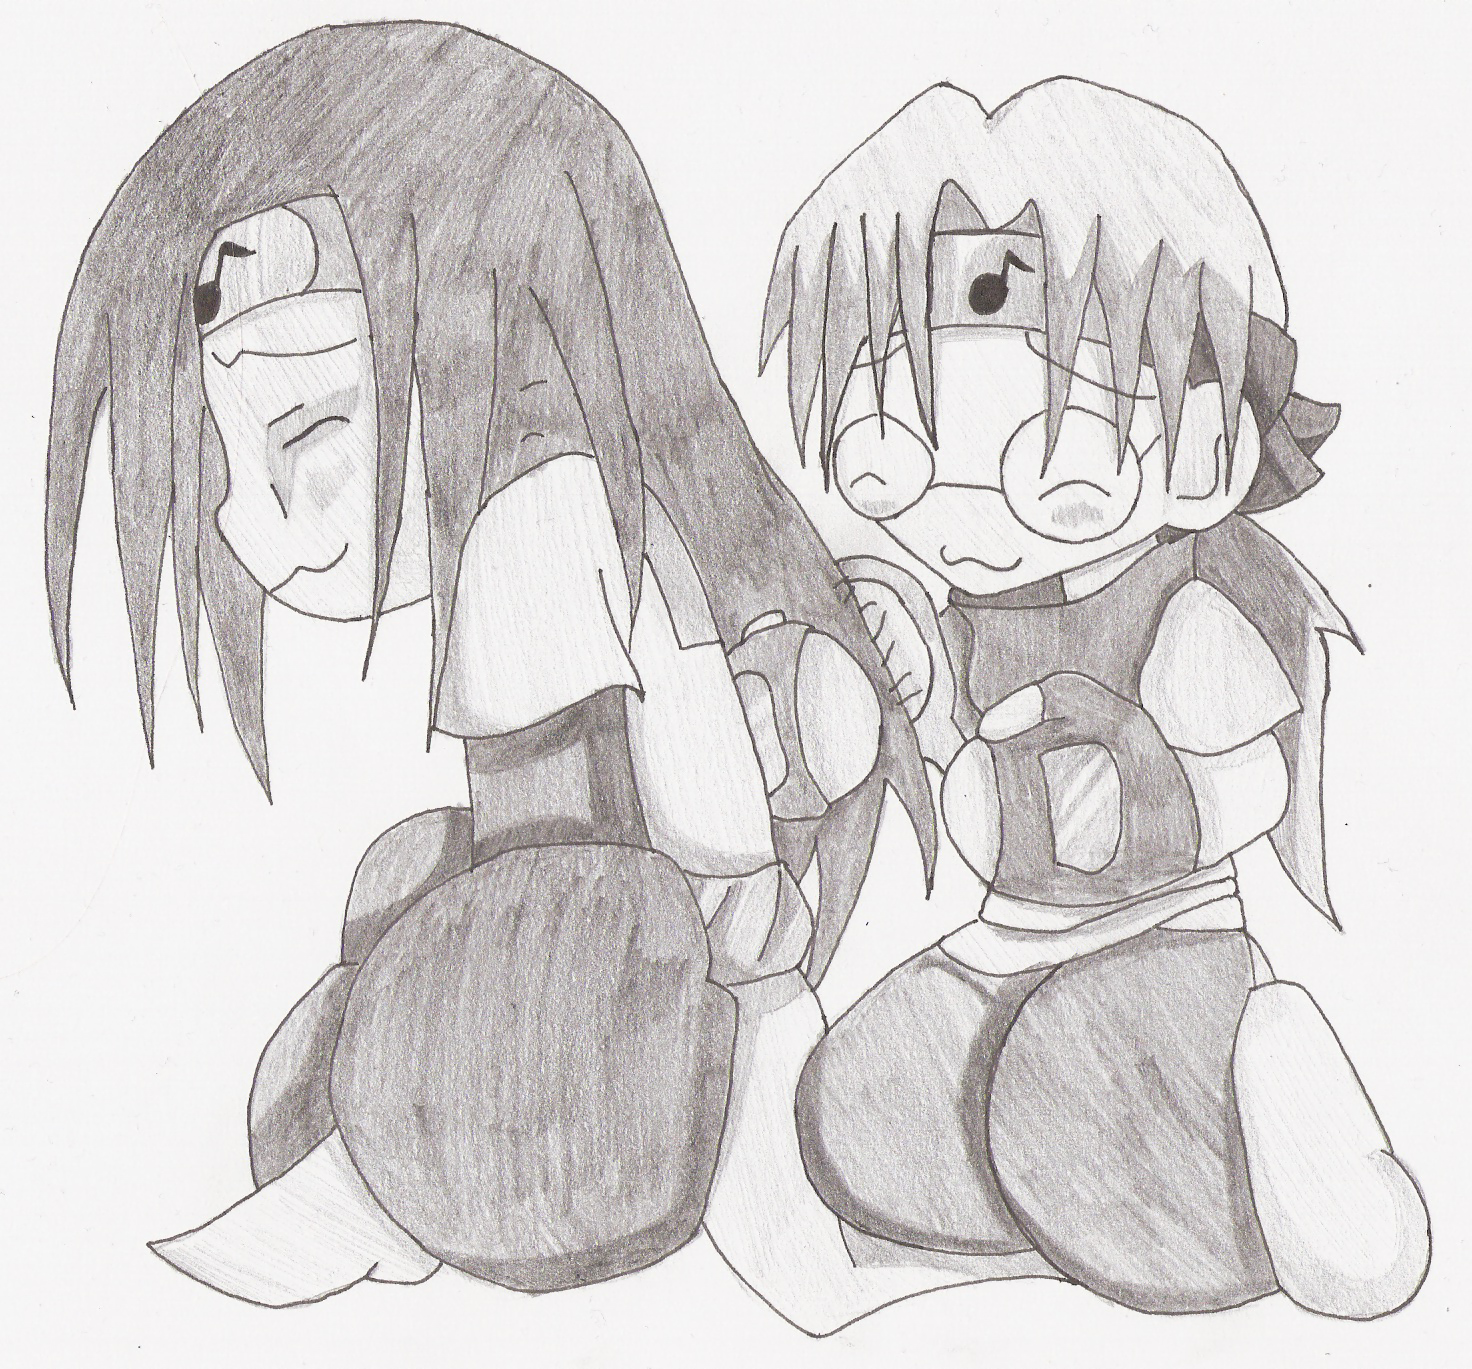 Orochimaru and Kabuto by CrimsonStains